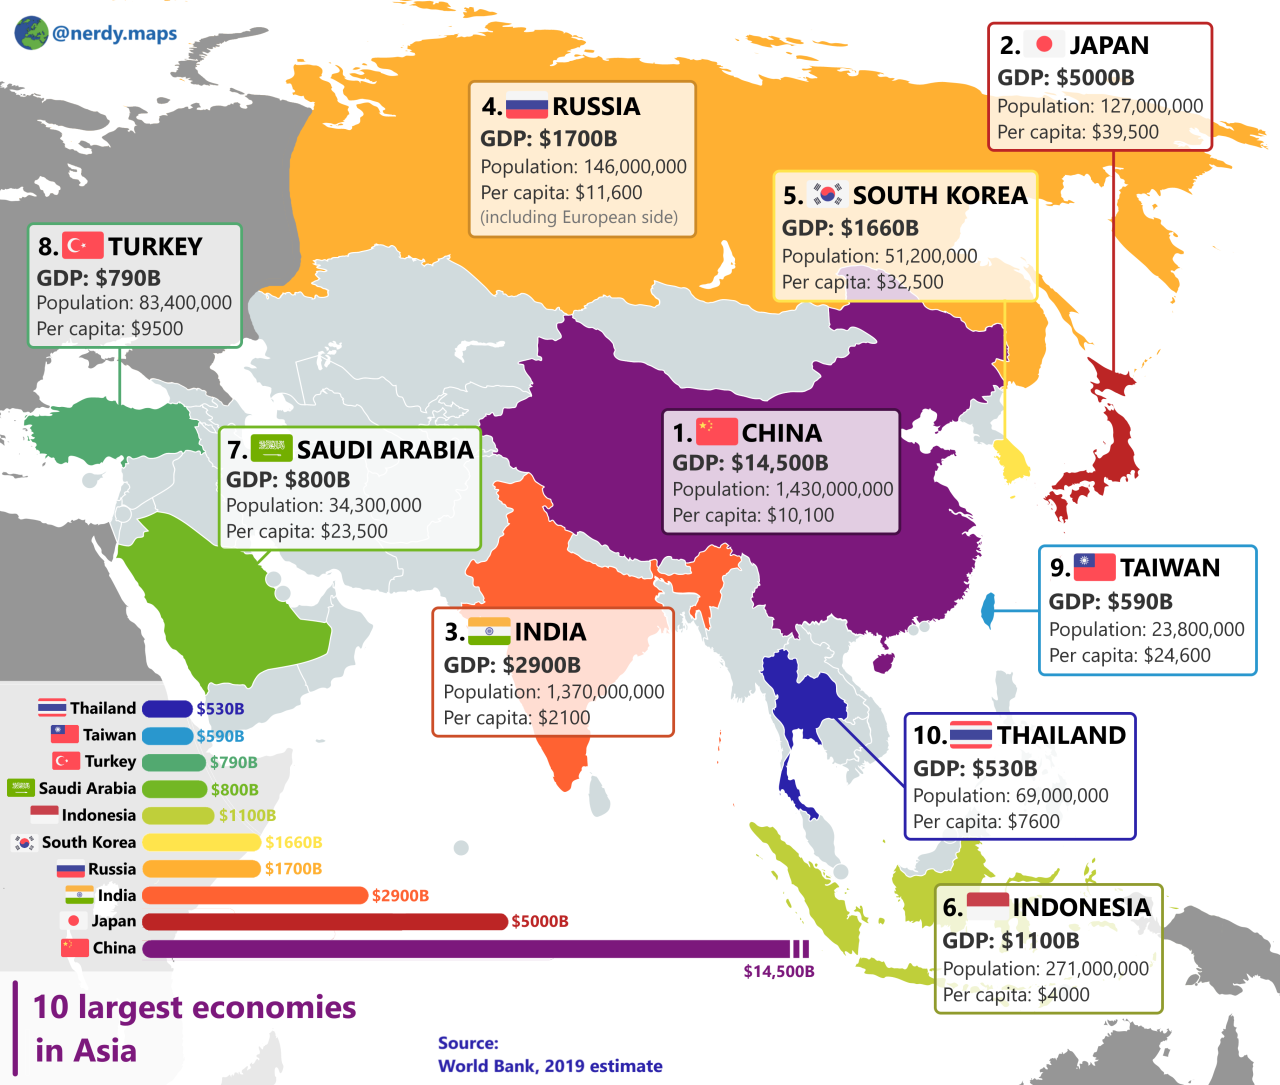 Top 10 largest economies in Asia.
by nerdy.maps